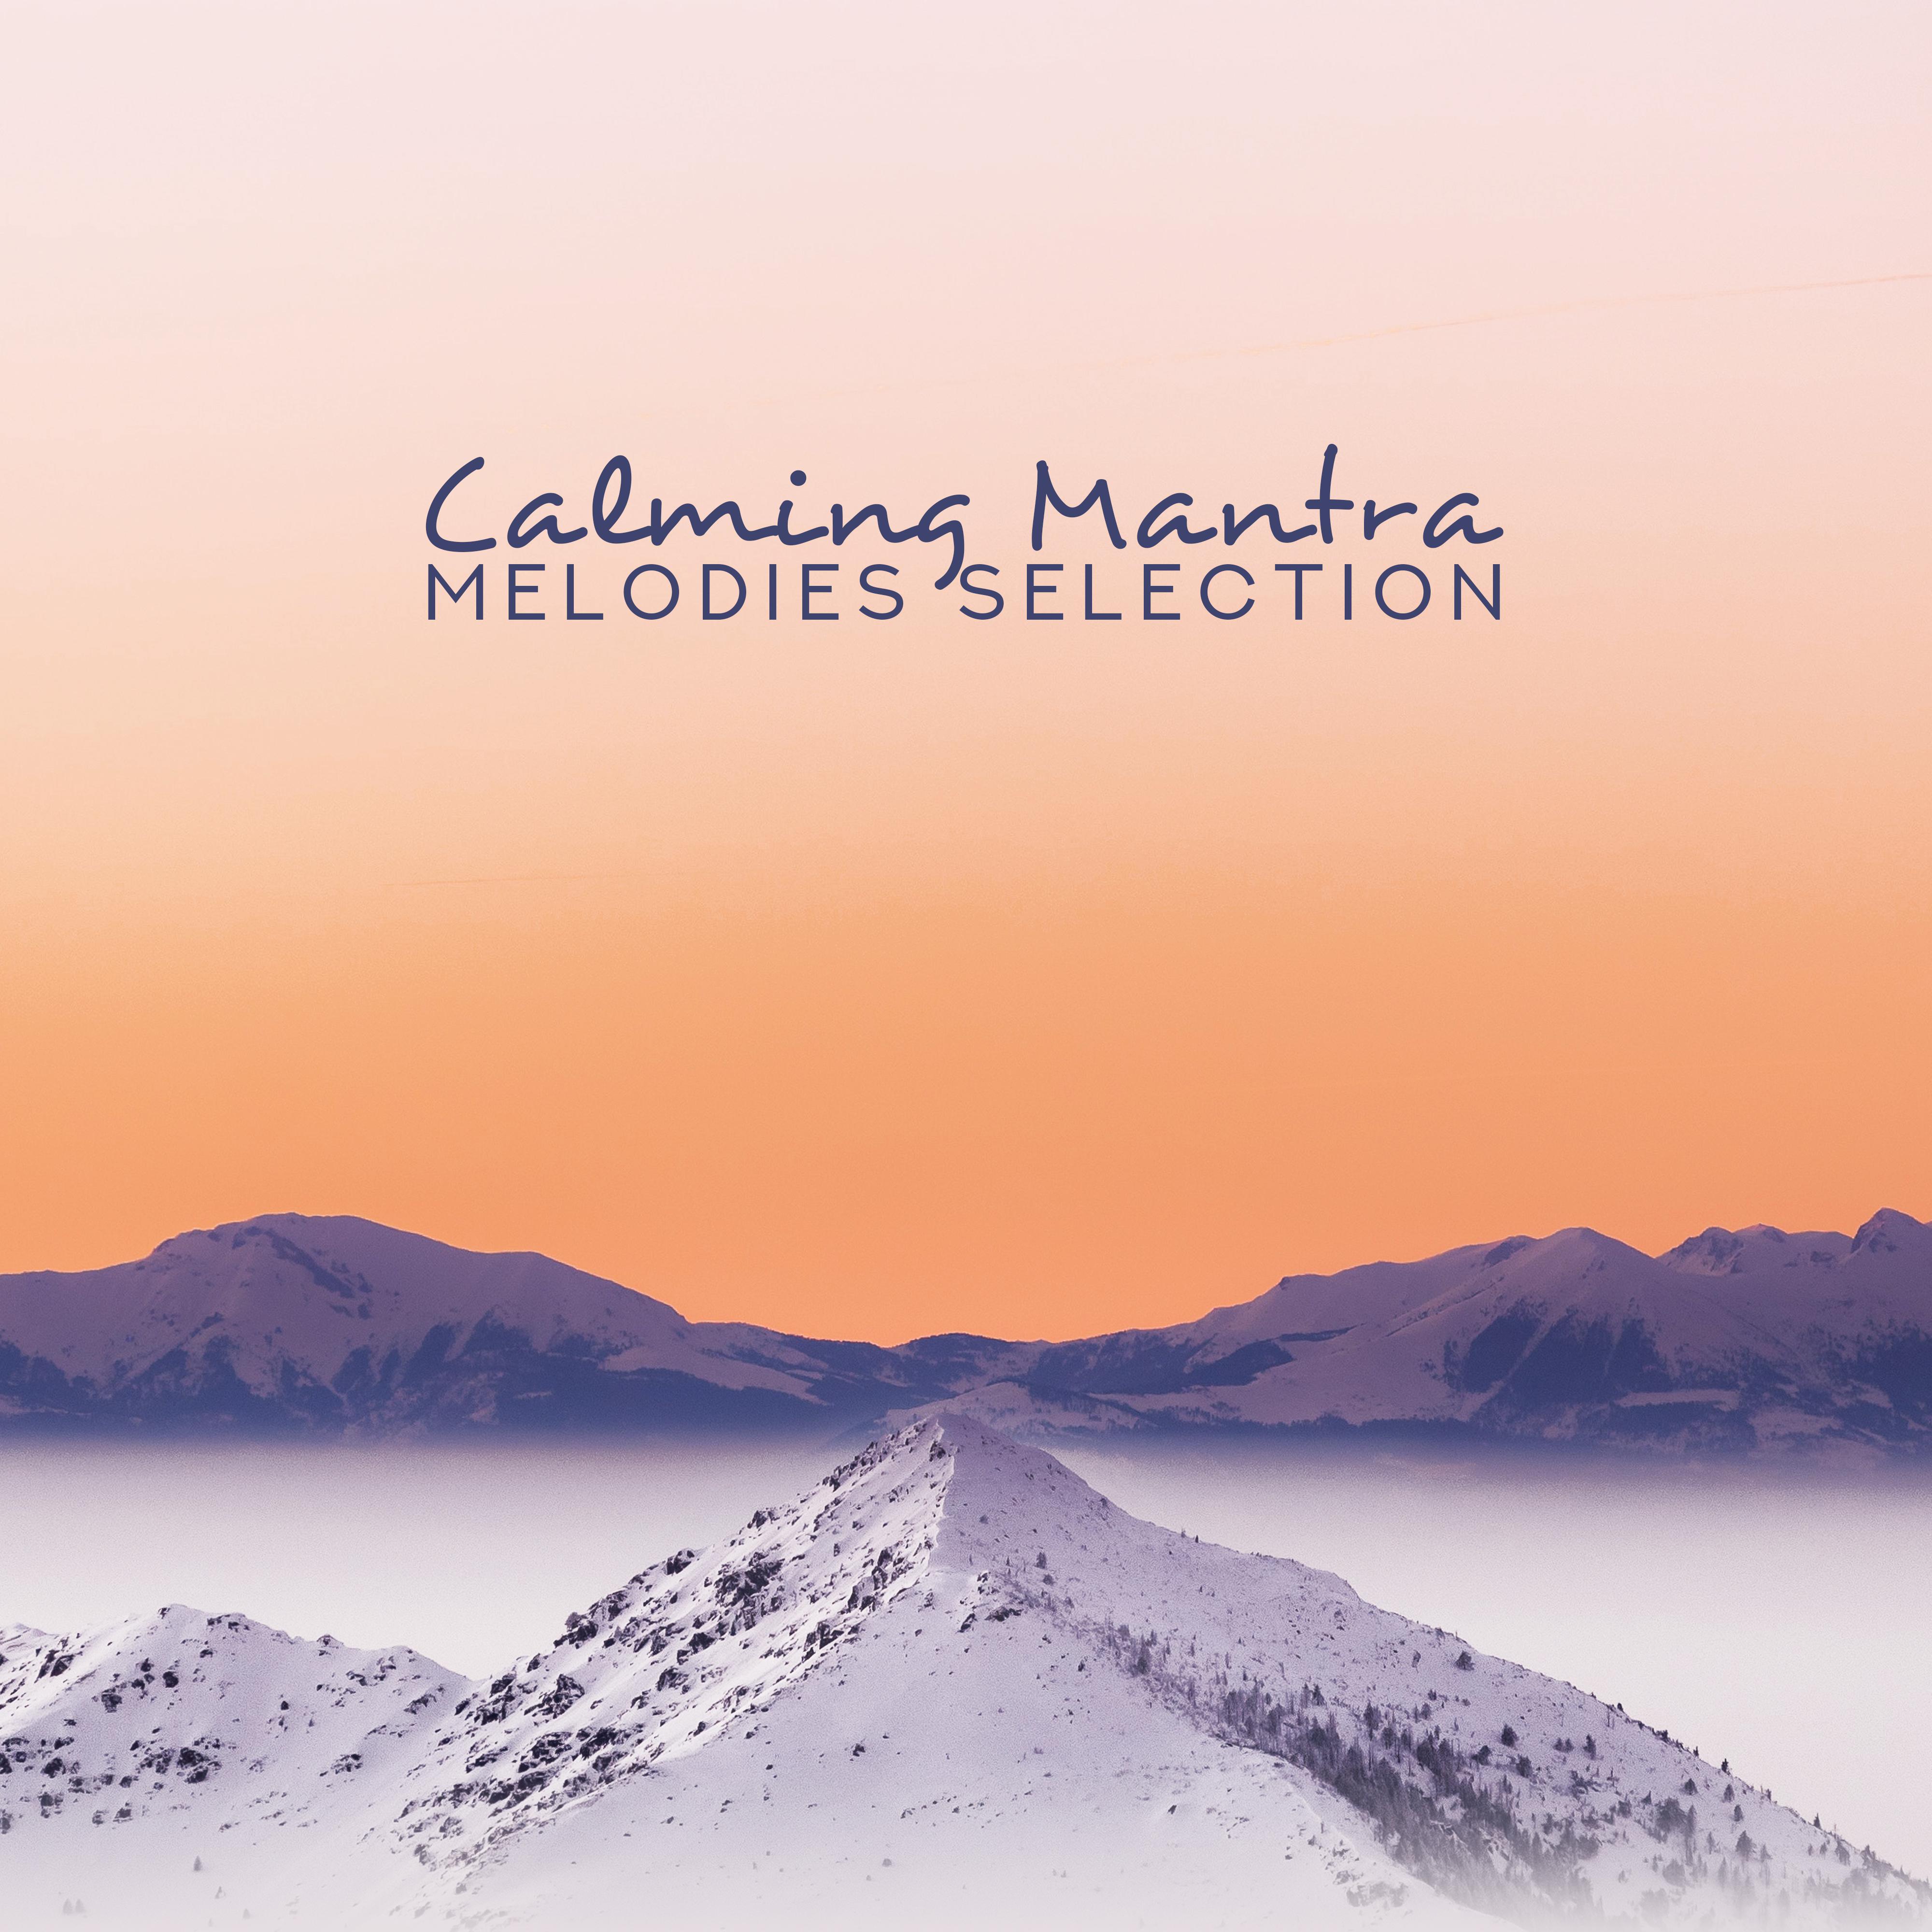 Calming Mantra Melodies Selection: Ambient Deep & Nature 2019 Music for Pure Relaxation & Meditation